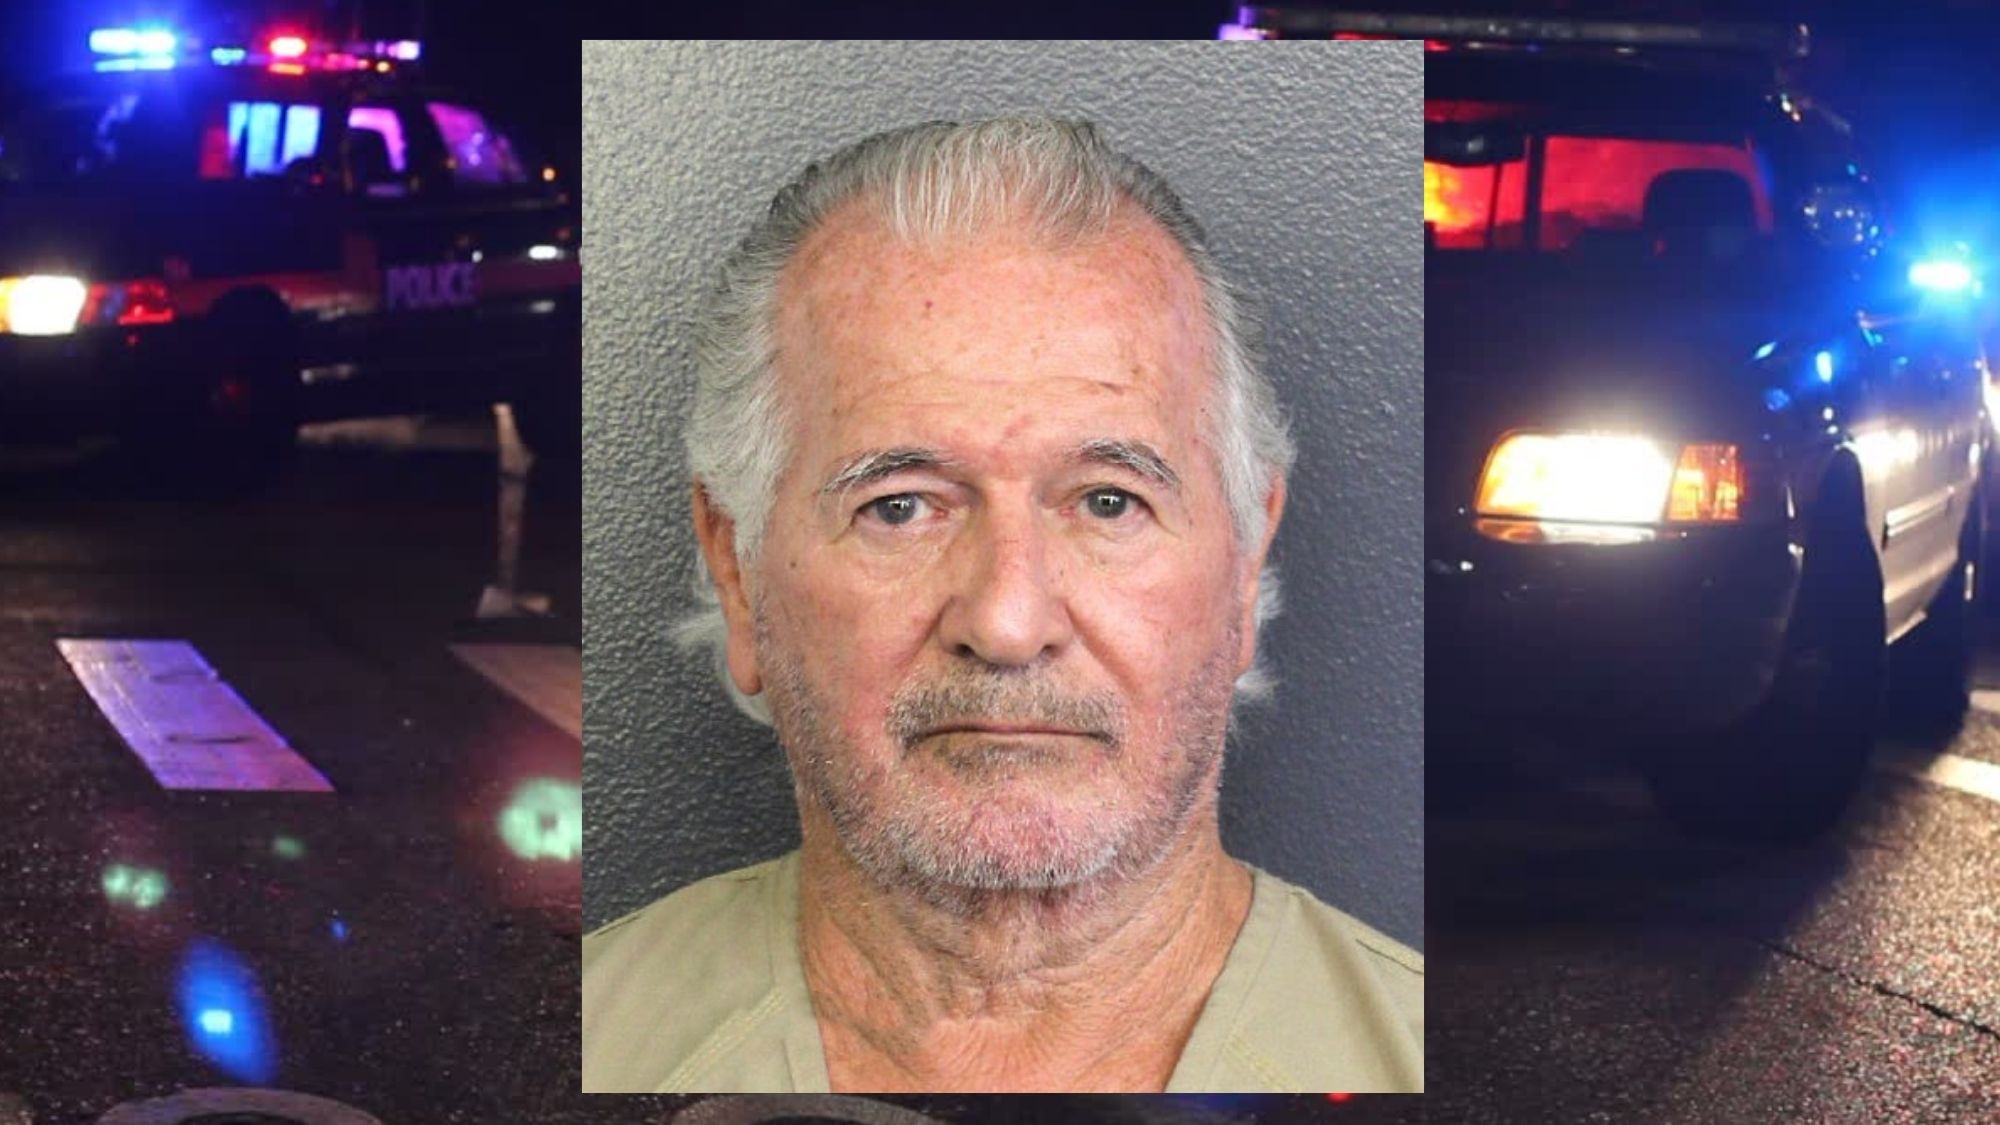 Tamarac Homeowner’s Association President Used His Position to Terrorize Neighbors, BSO Says